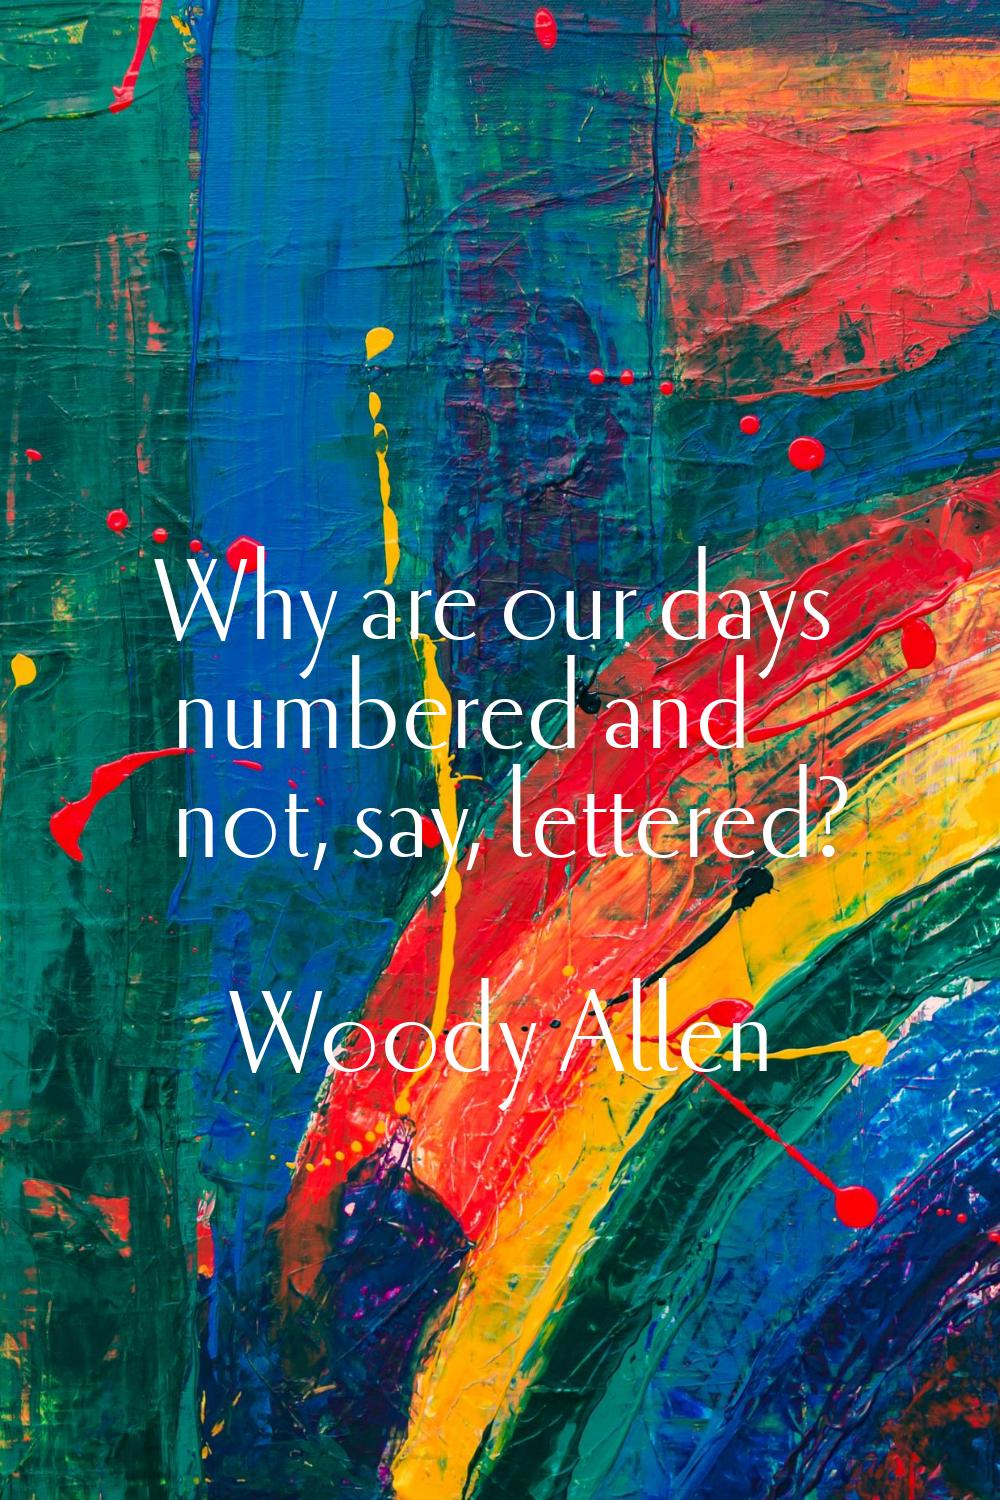 Why are our days numbered and not, say, lettered?